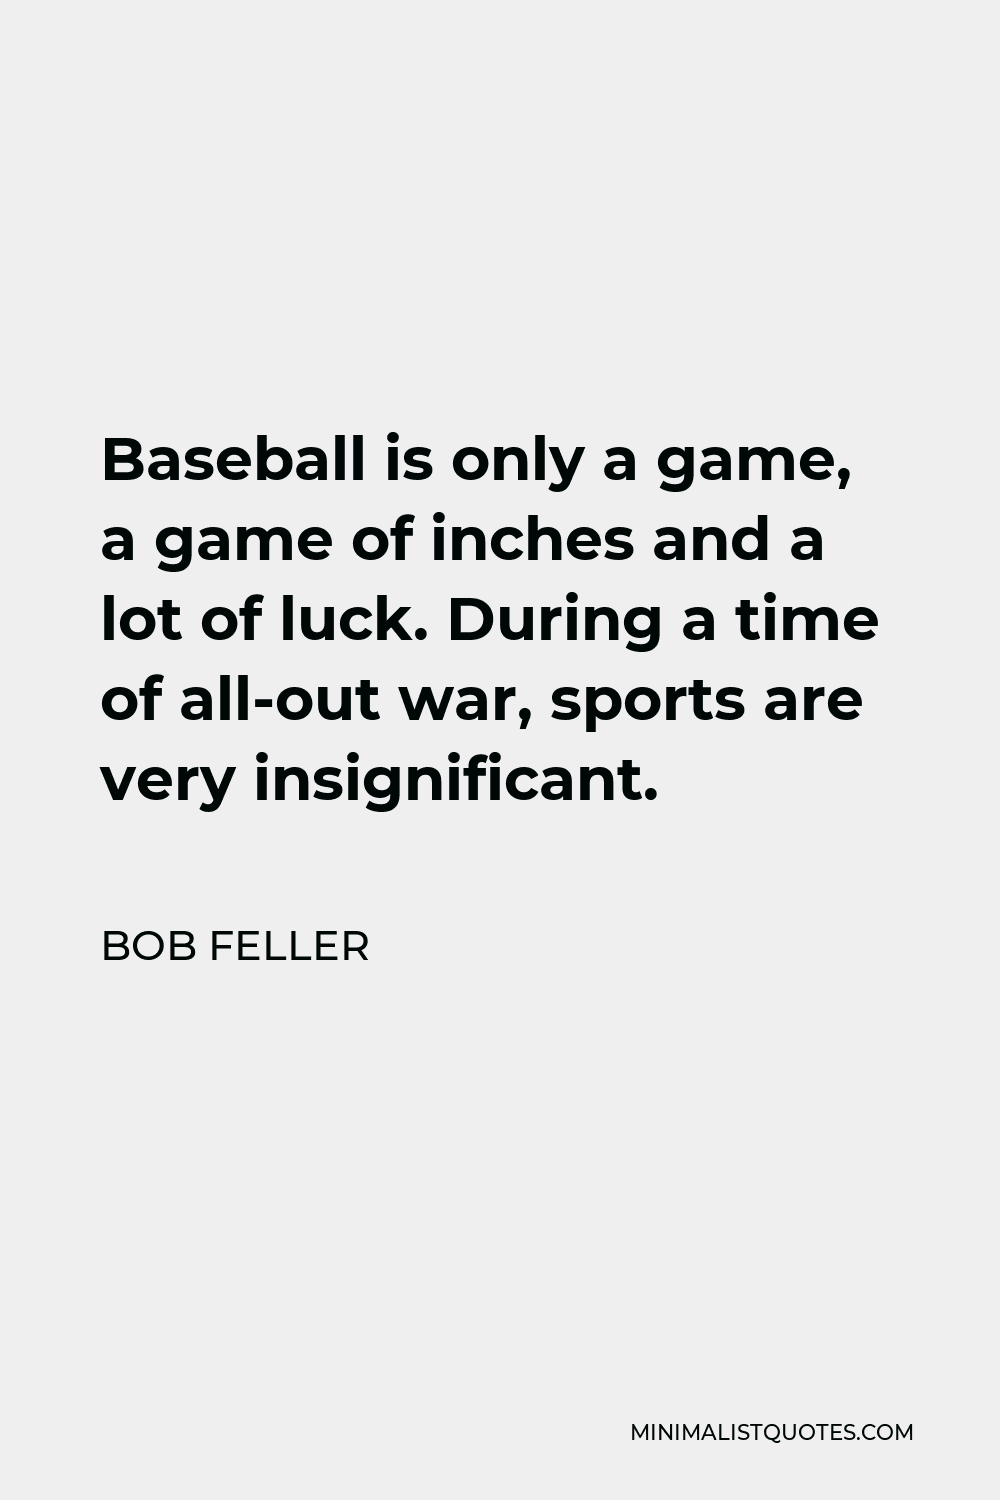 Bob Feller Quote - Baseball is only a game, a game of inches and a lot of luck. During a time of all-out war, sports are very insignificant.